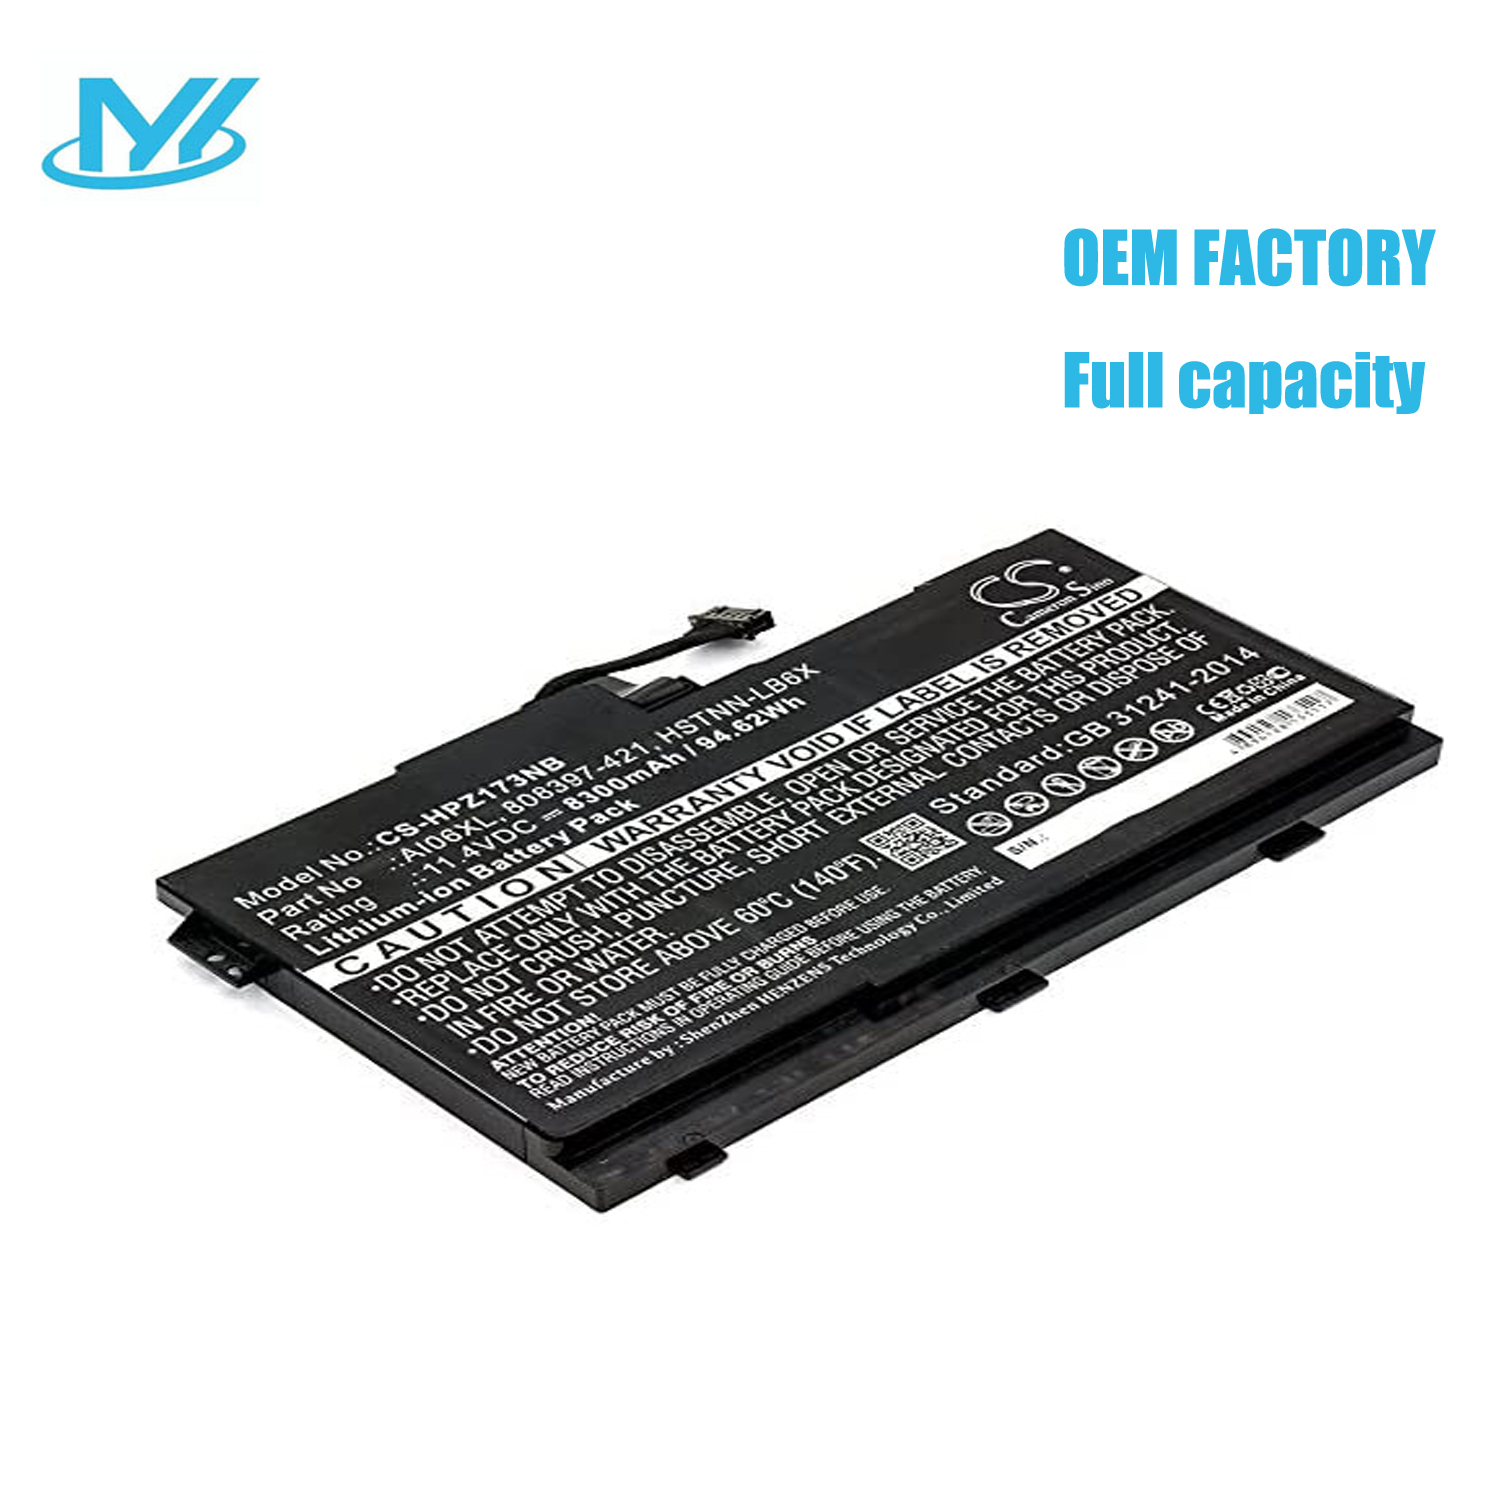 AI06XL rechargeable lithium ion Notebook battery Laptop battery 11.4 96Wh 8420mAh for HP laptop ZBook 17 G3 Series Notebook.